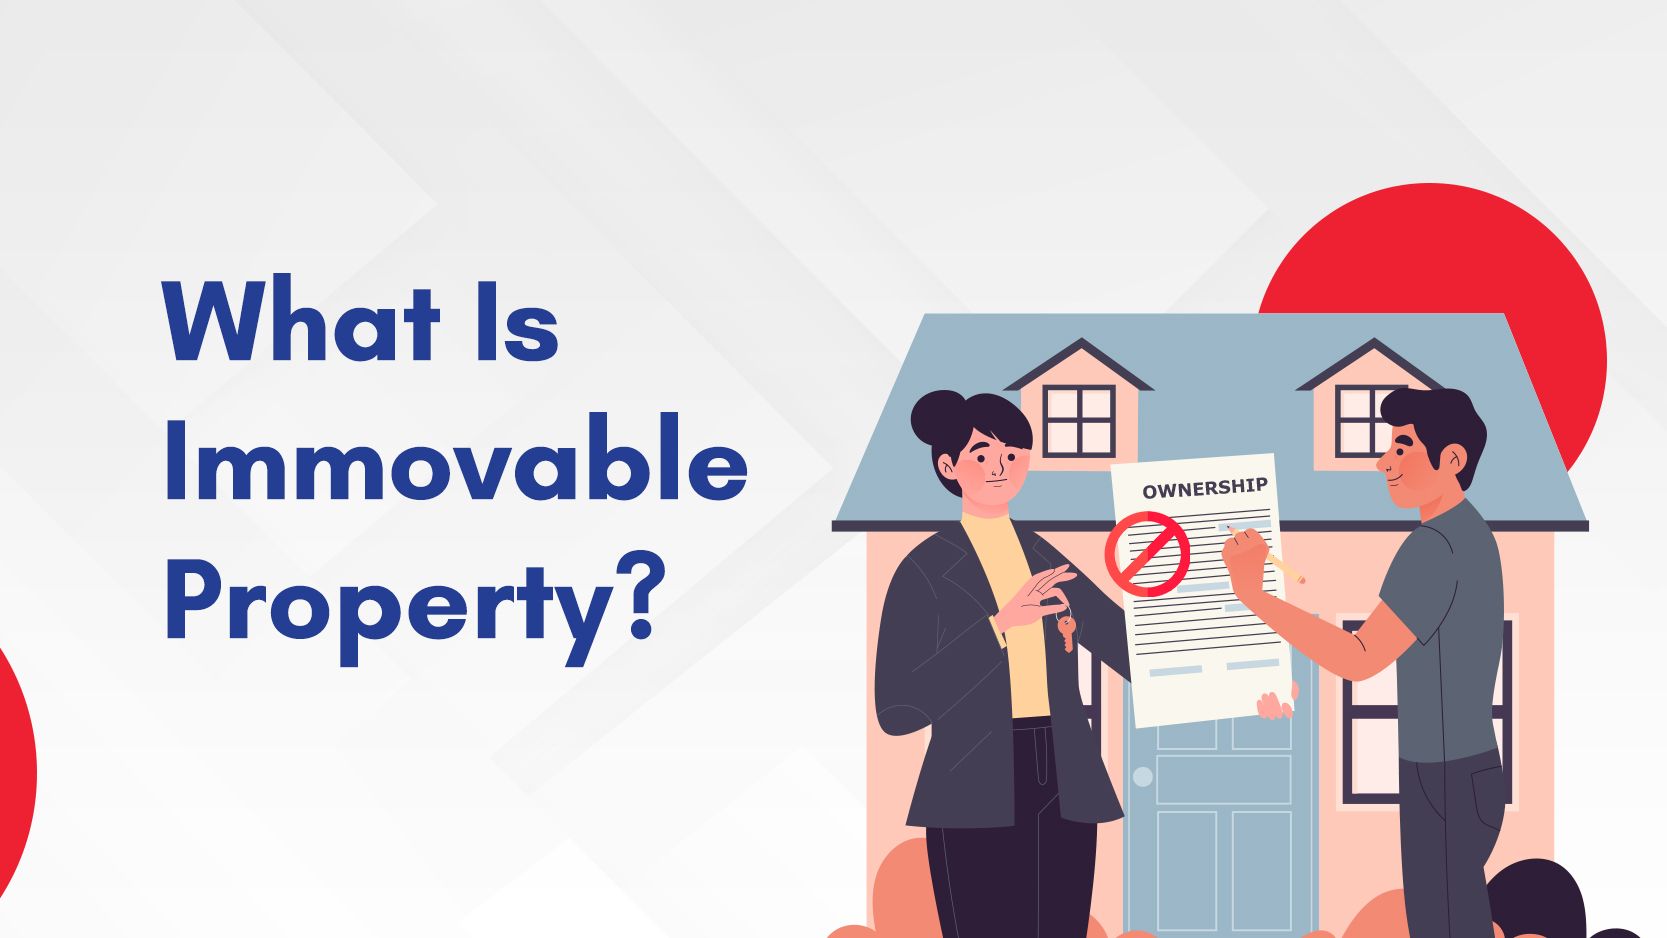 Immovable Property - Learn Definition, Examples and Differences